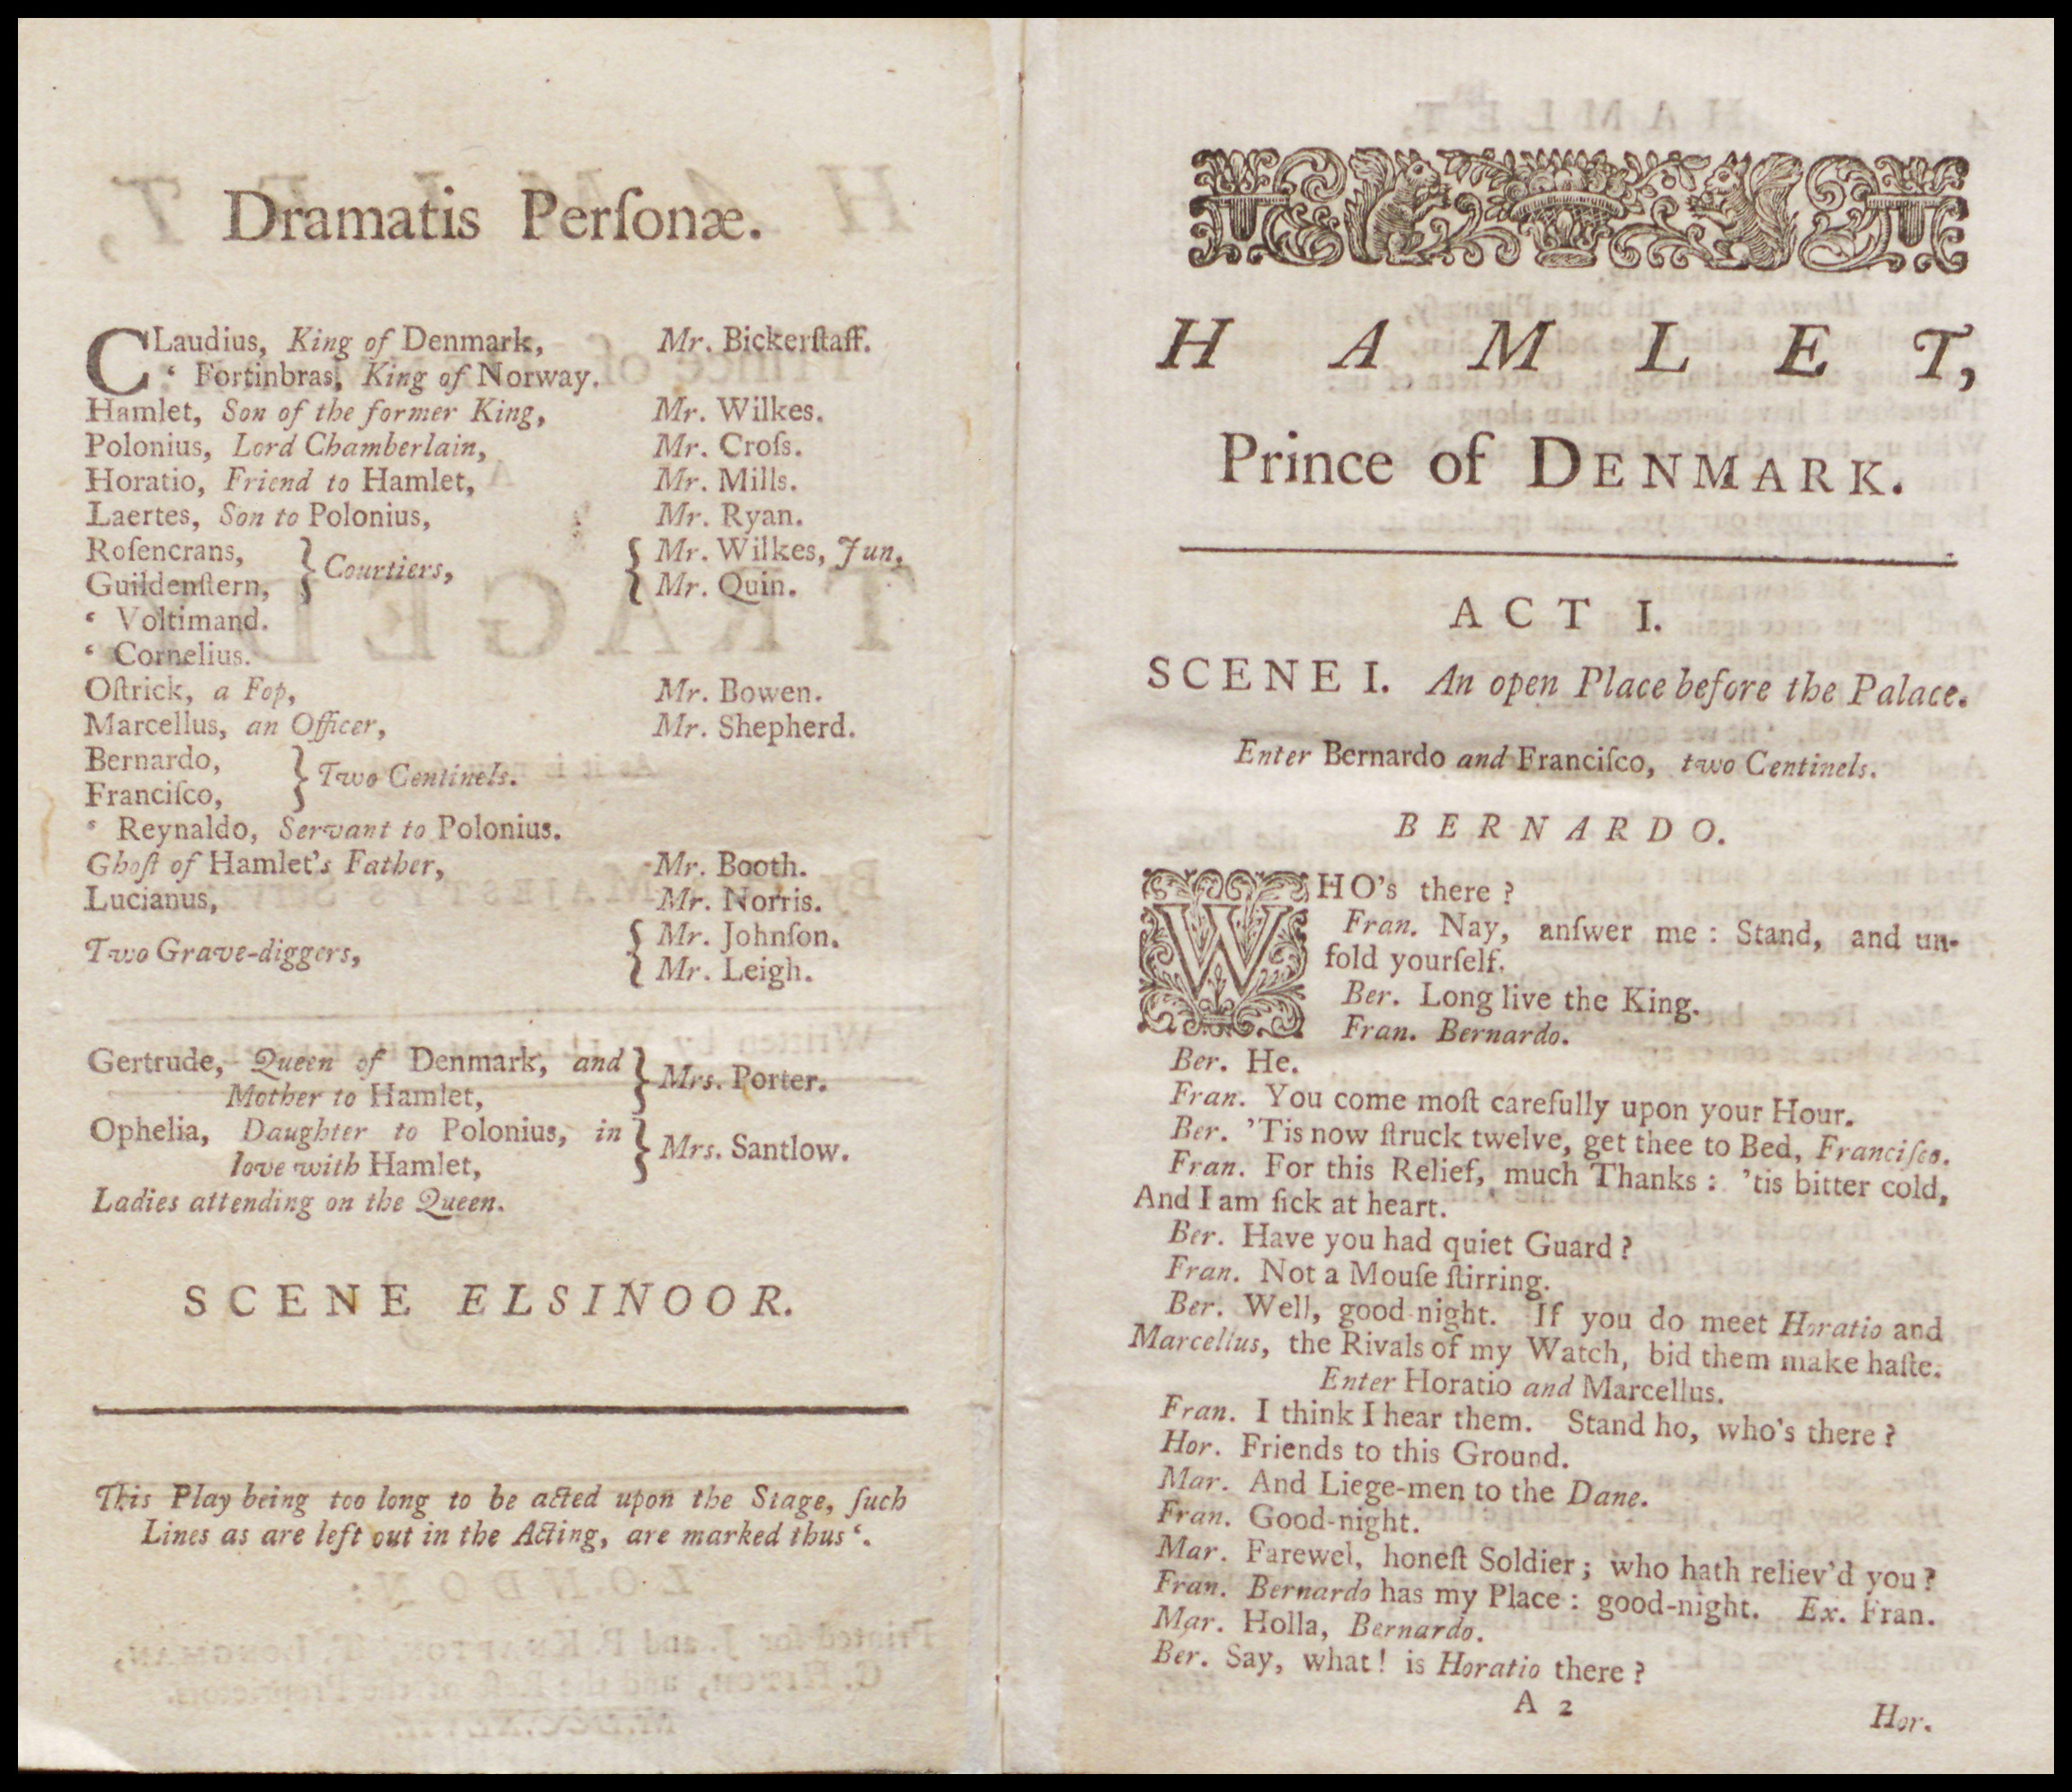 Title page of Garrick's Hamlet prompt book.